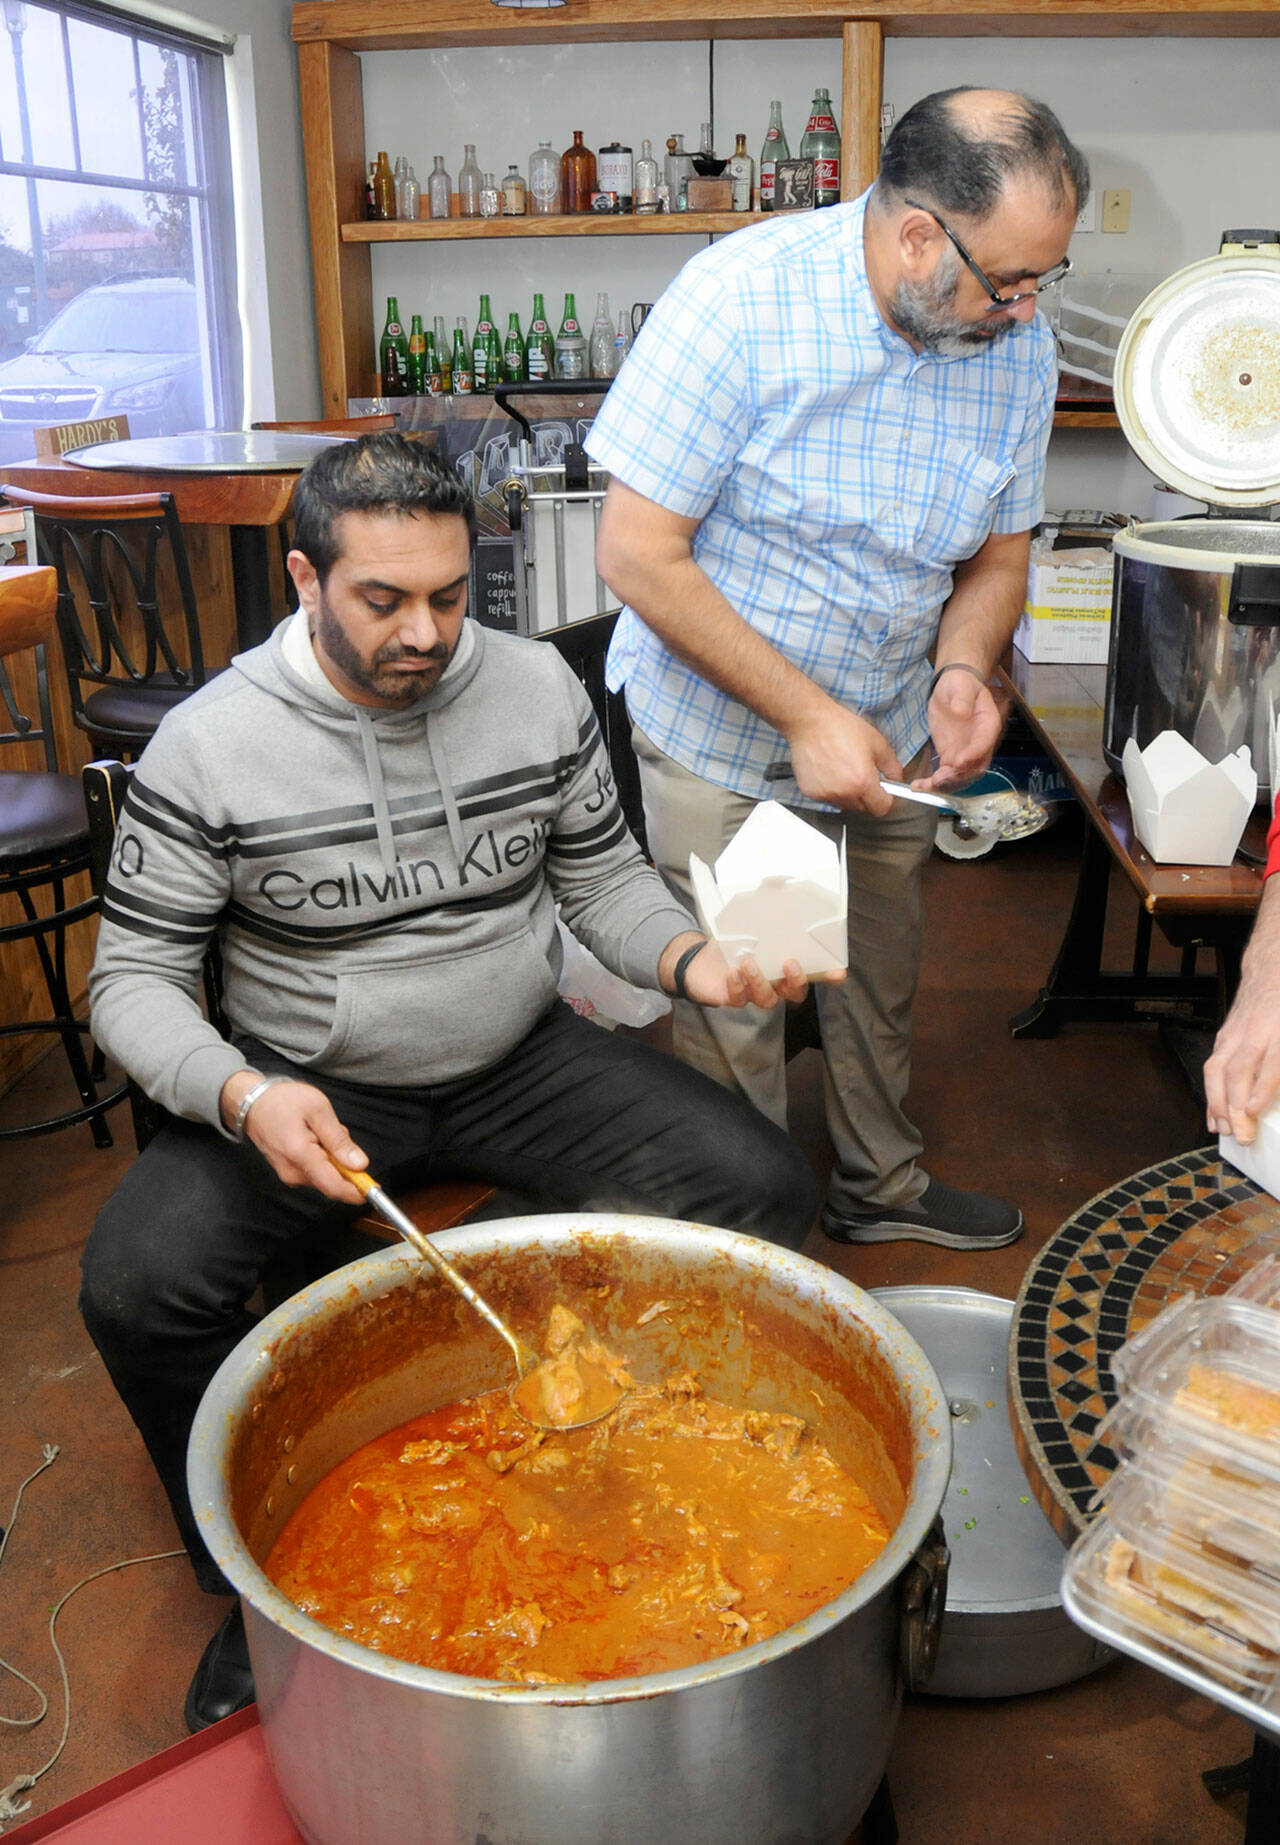 Harry Nagra, left, and Harry Sangha, owners of Hardy’s Market in Sequim, dish out dinner boxes of Biryani chicken and rice for the market’s annual Thanksgiving Day meal giveaway. The meals also included slices of pumpkin pie for distribution to hungry diners. (Keith Thorpe/Peninsula Daily News)